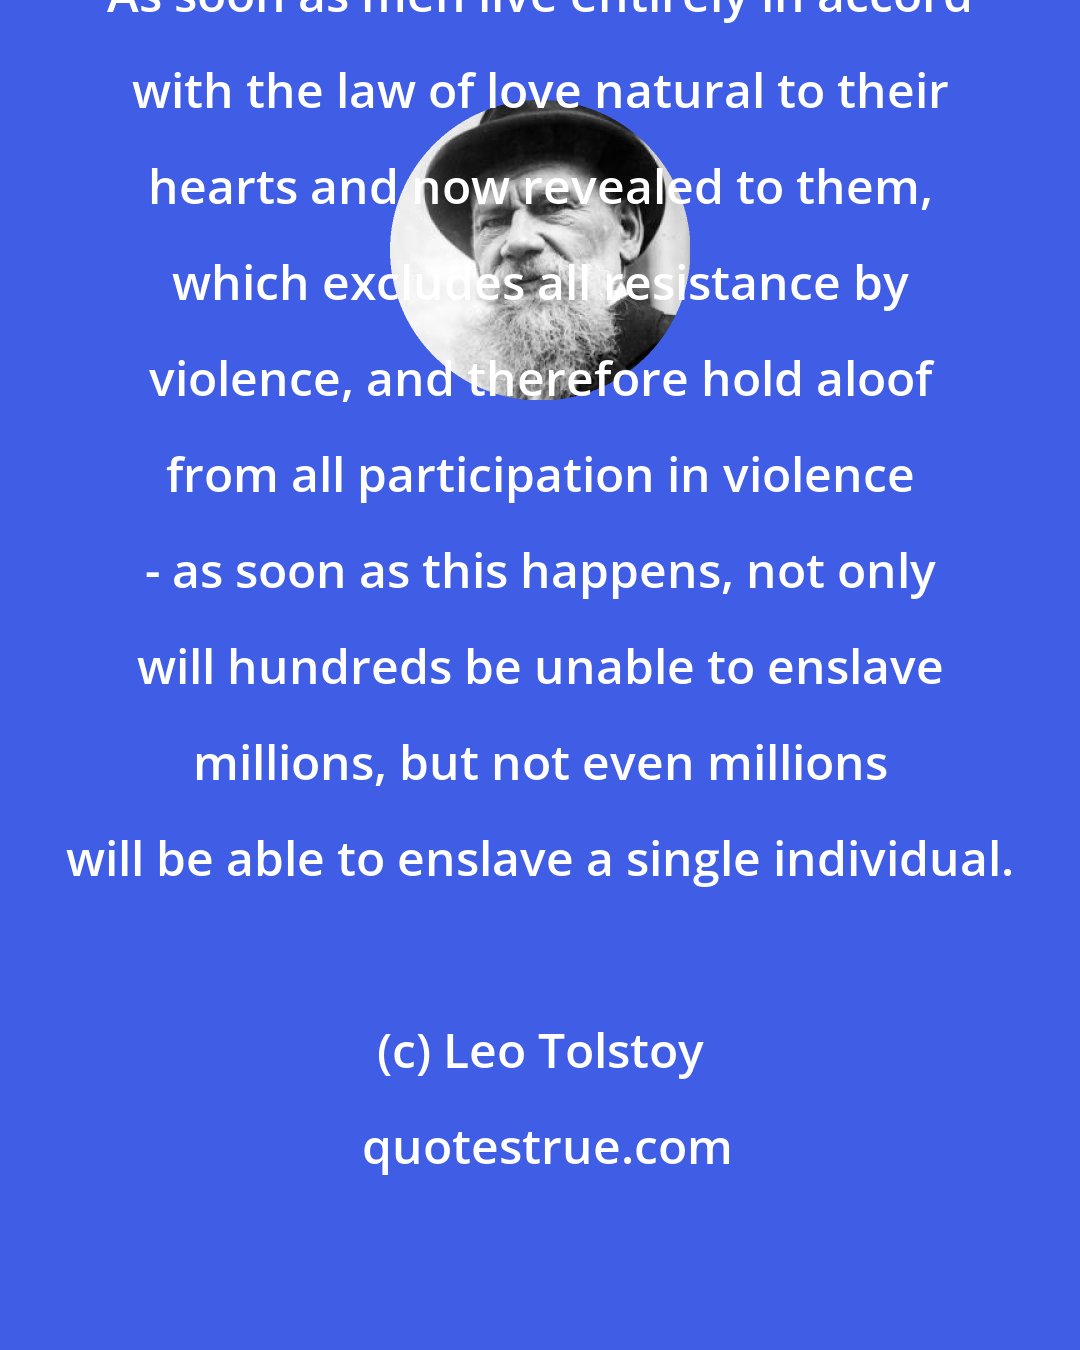 Leo Tolstoy: As soon as men live entirely in accord with the law of love natural to their hearts and now revealed to them, which excludes all resistance by violence, and therefore hold aloof from all participation in violence - as soon as this happens, not only will hundreds be unable to enslave millions, but not even millions will be able to enslave a single individual.